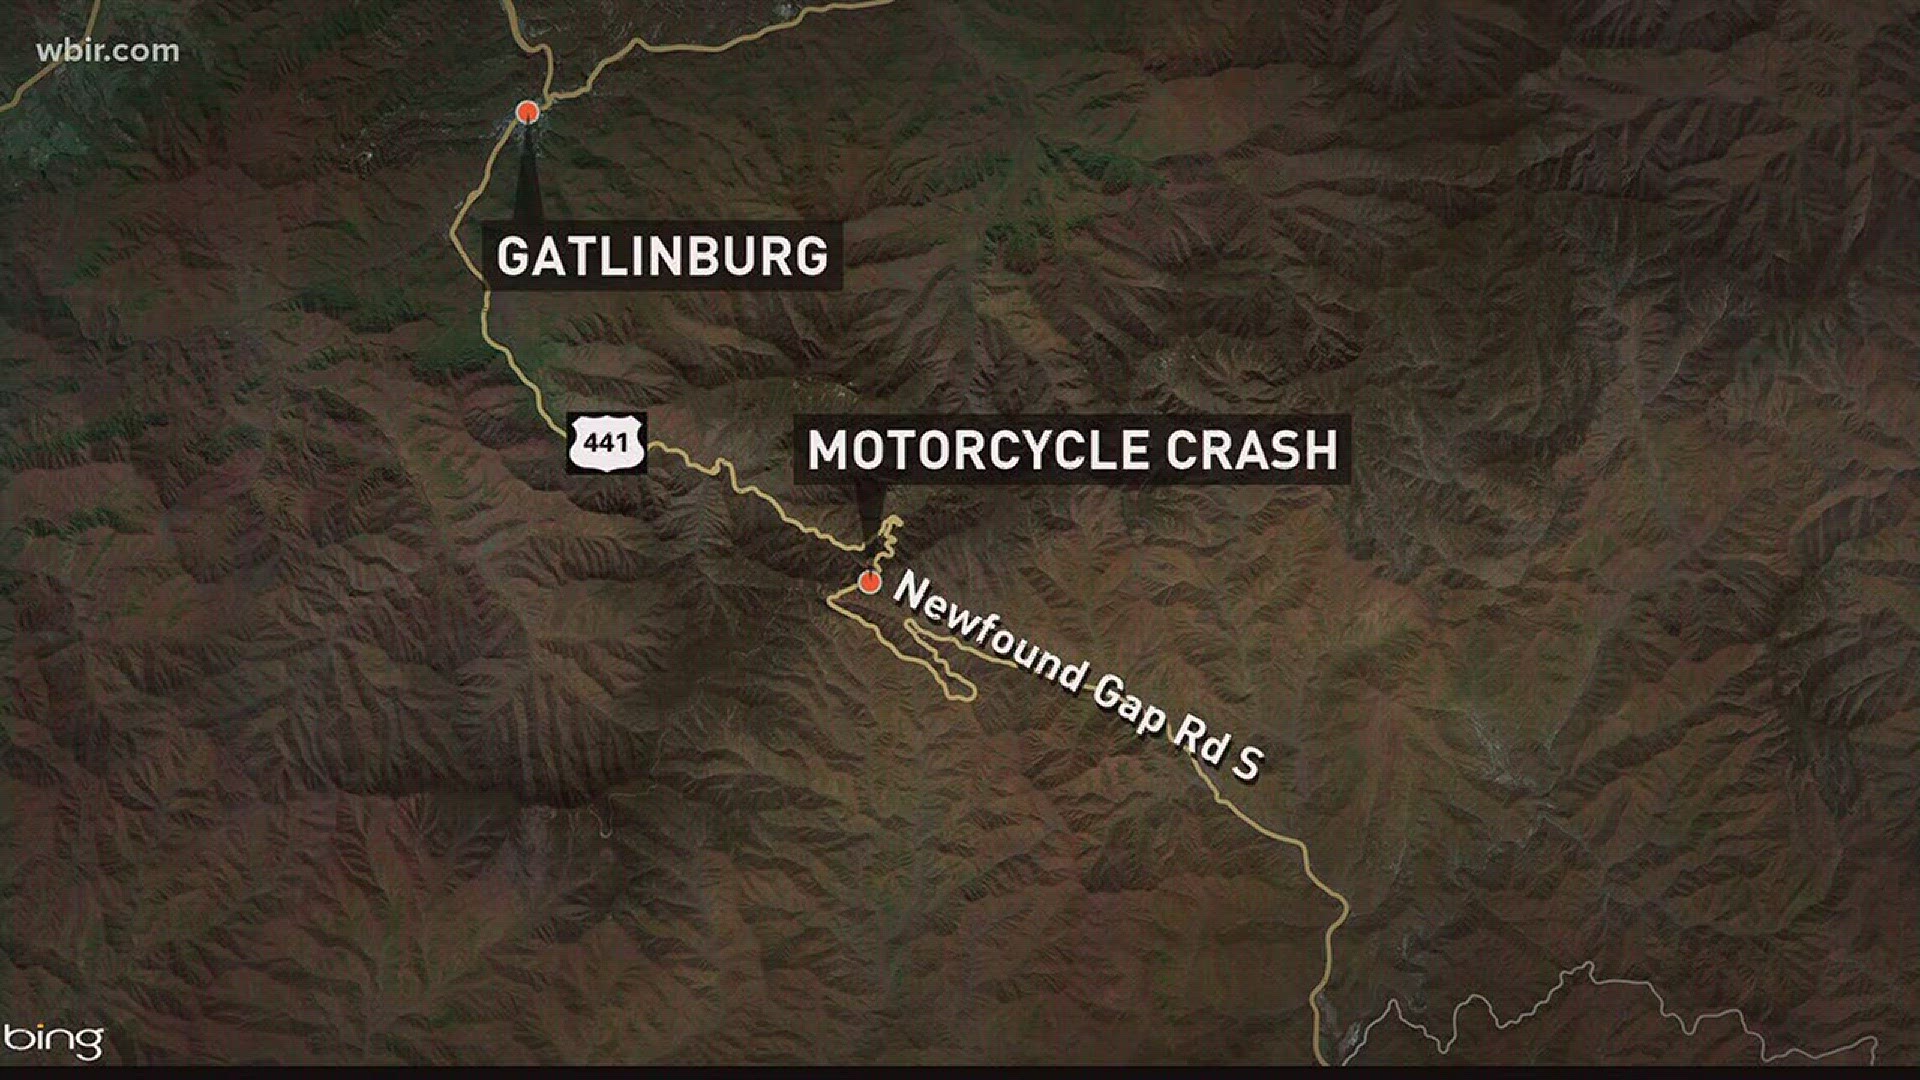 Oct. 27, 2017: A man is dead and a woman is hurt after a motorcycle wreck in the Great Smoky Mountains.